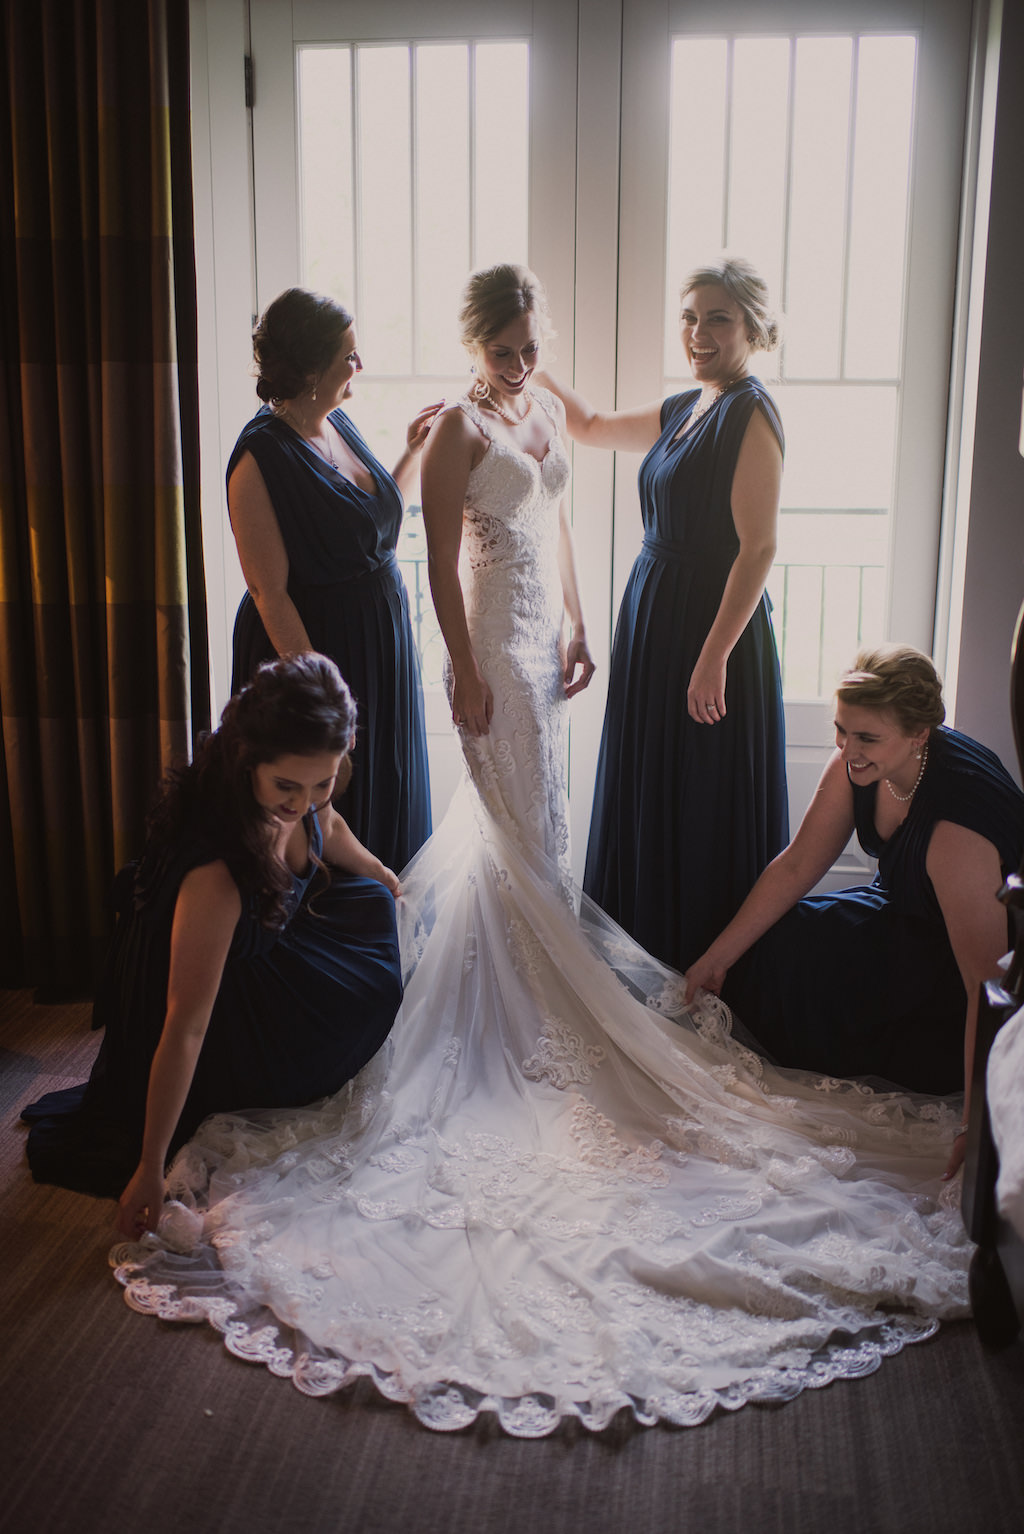 Bride and Bridesmaids Getting Ready Wedding Portrait, Bride in Lace V-Neckline with Lace Straps Essense of Australia Wedding Dress, Bridesmaids in Navy Blue Long Matching Dresses